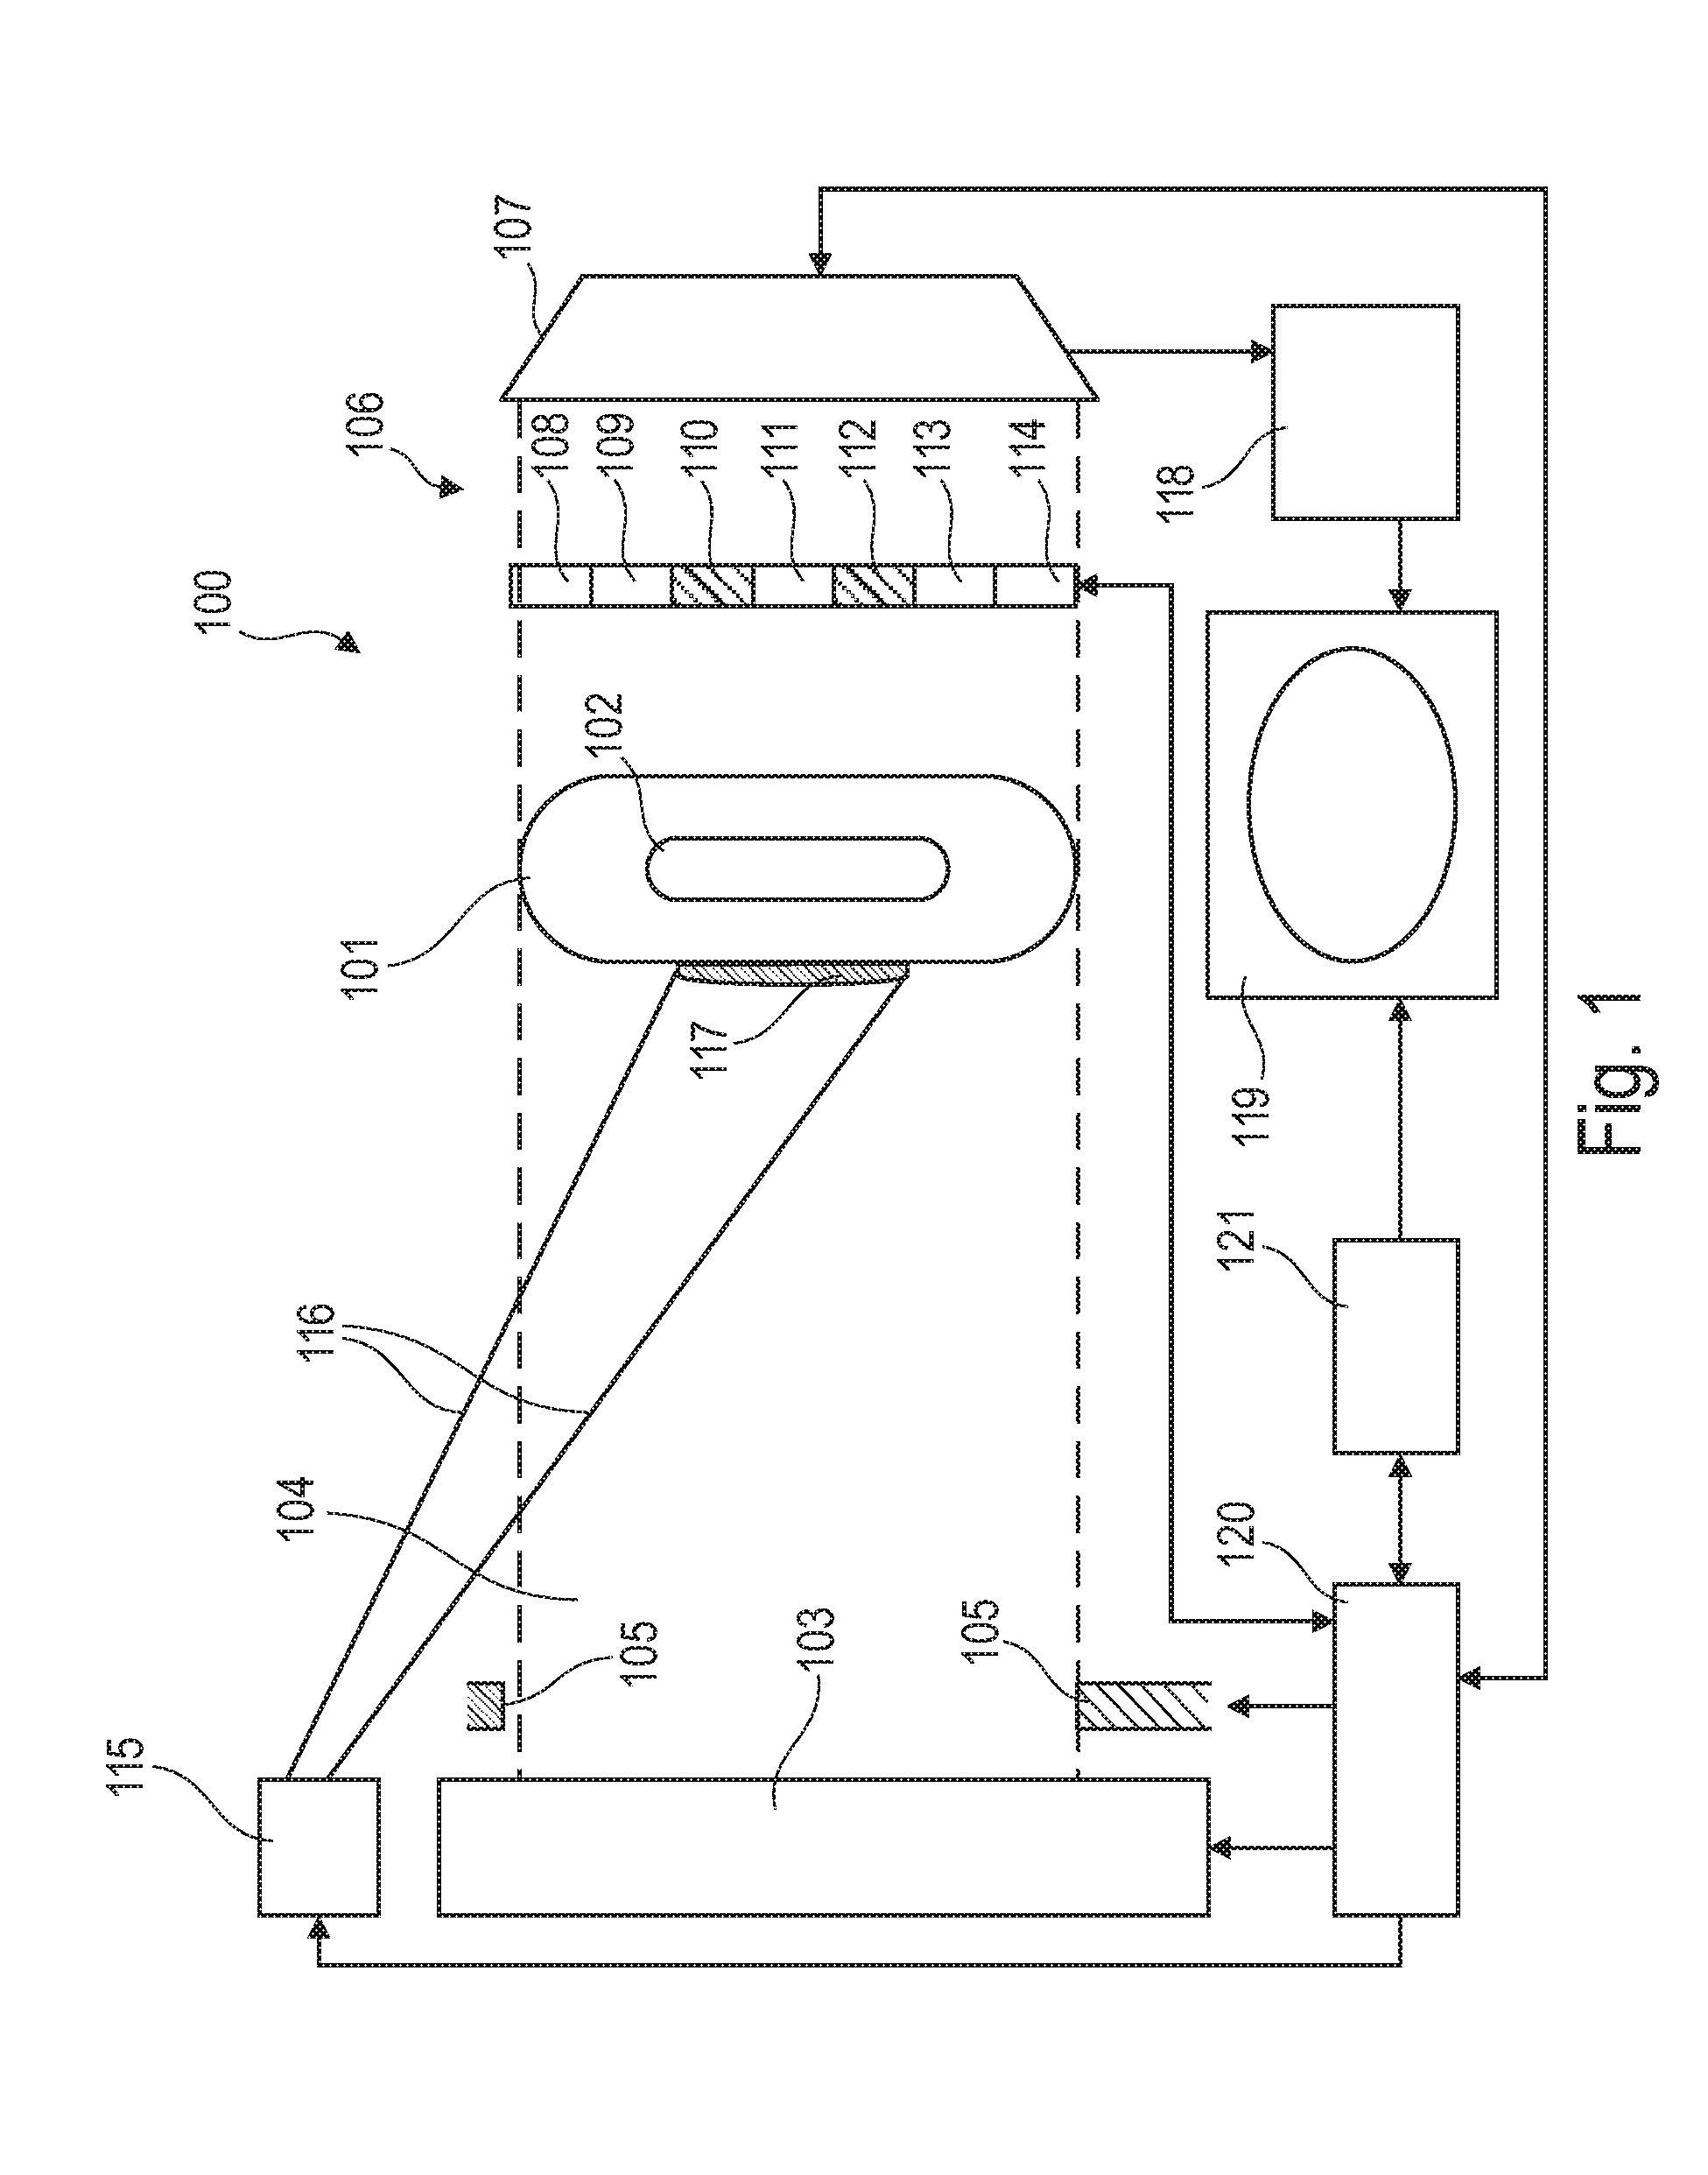 X-ray image apparatus and method of imaging an object under examination